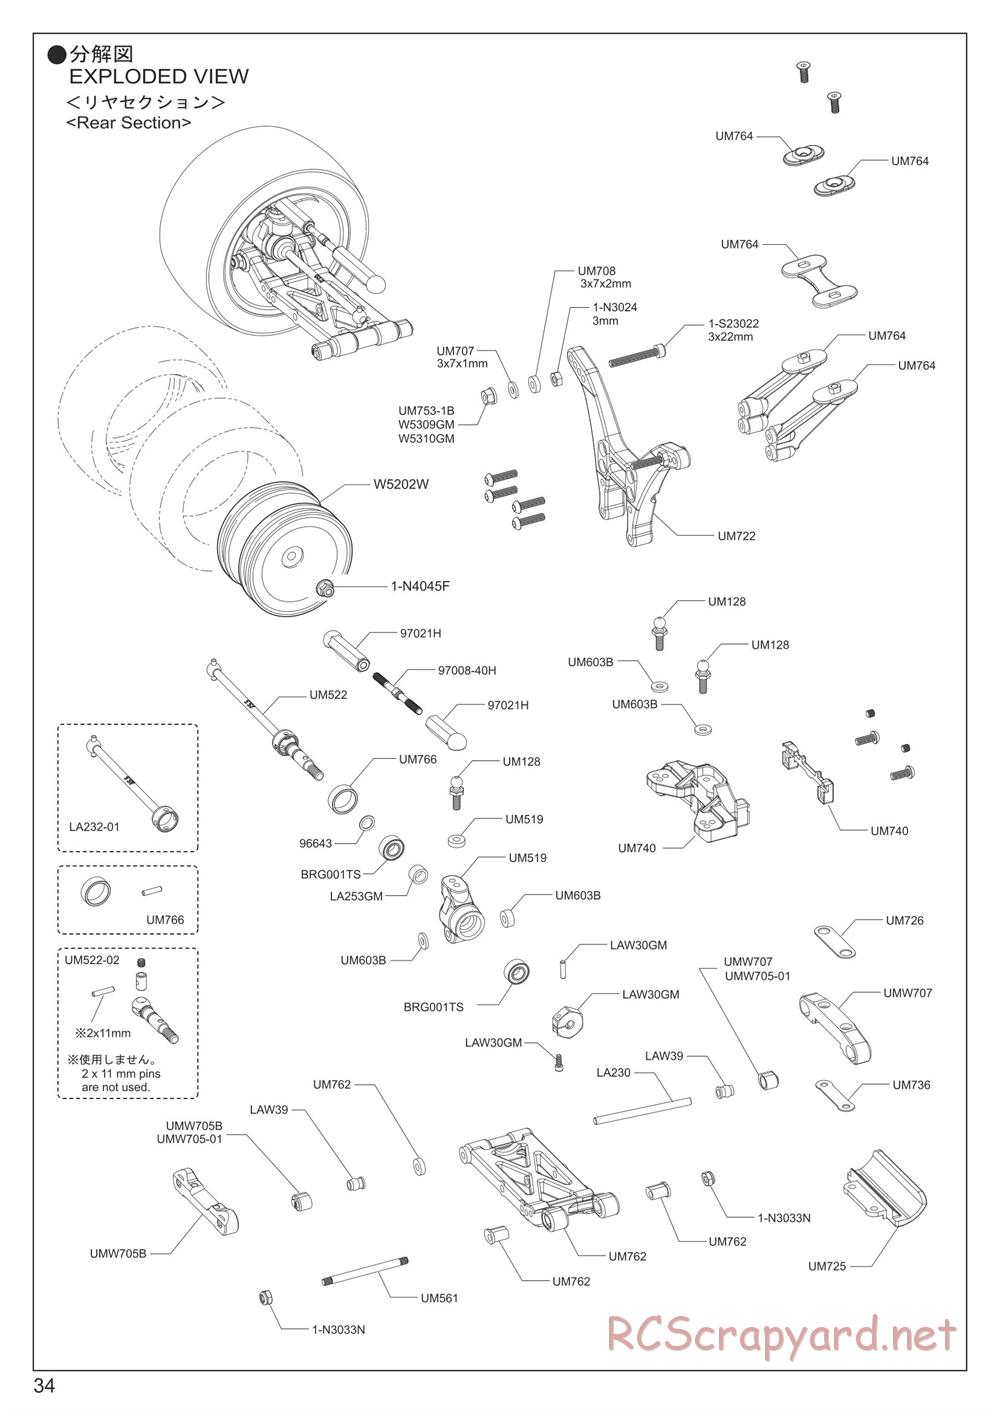 Kyosho - Ultima RB7 - Exploded Views - Page 4